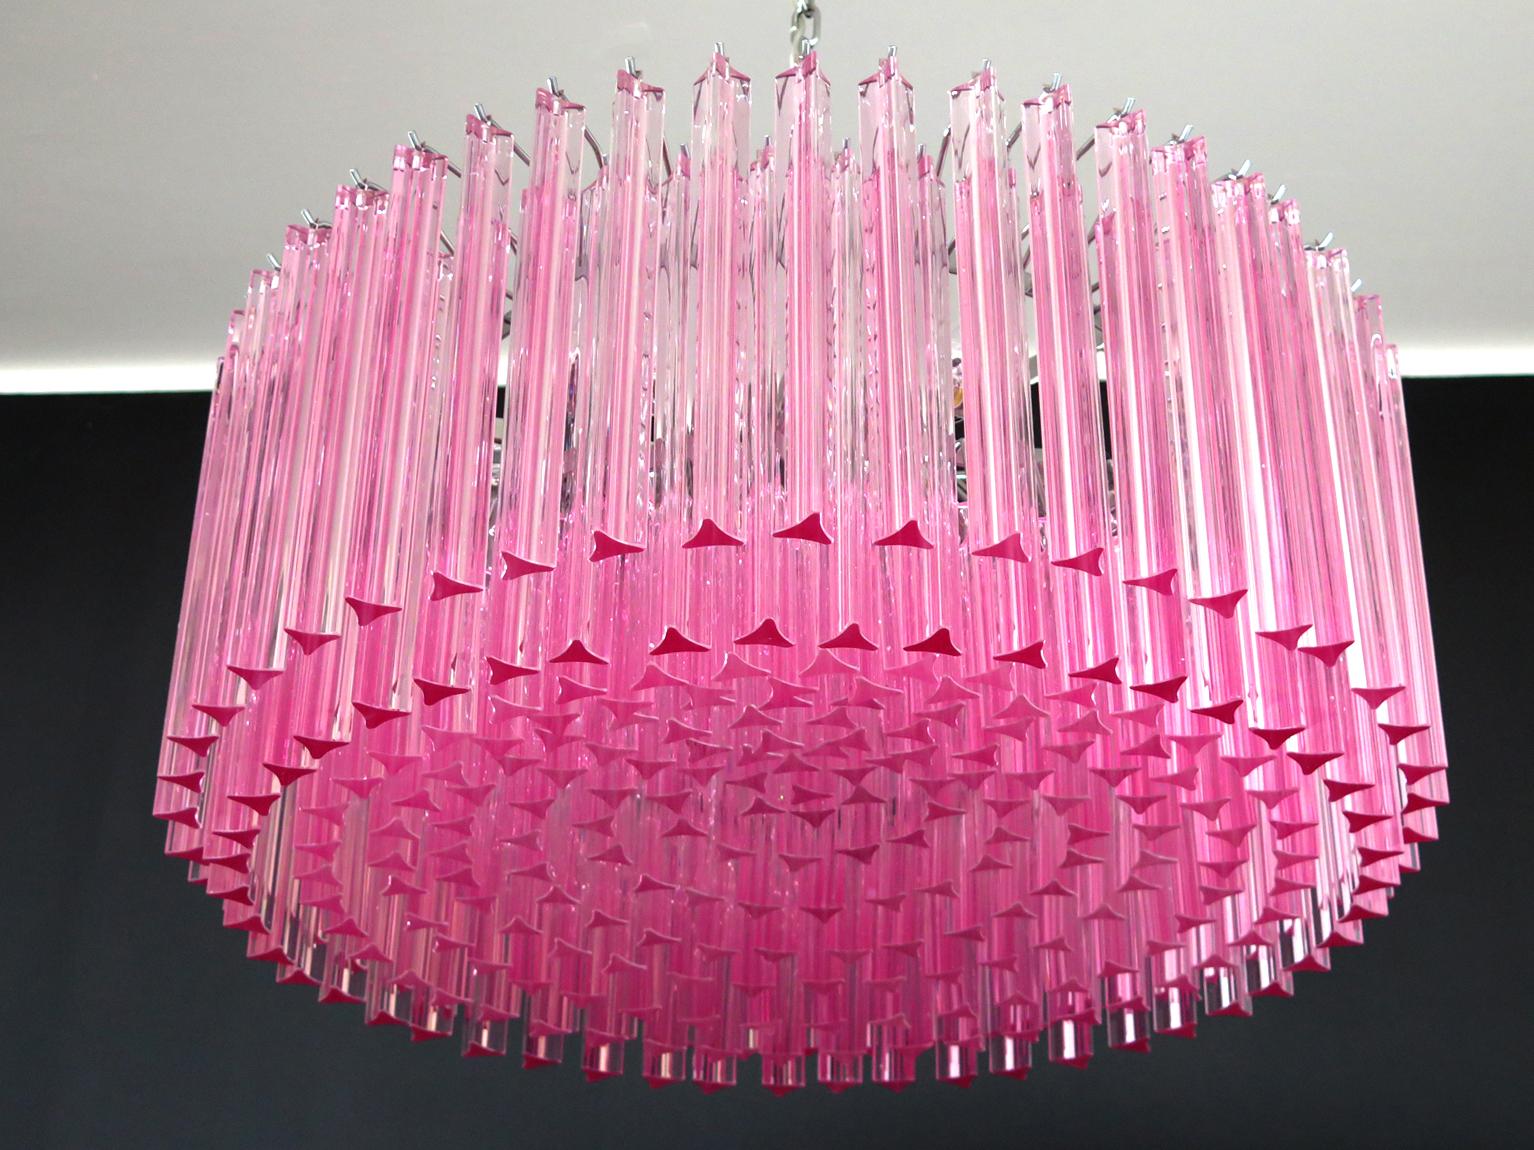 A magnificent Murano glass chandelier, 265 pink triedri on chrome frame. This large midcentury Italian chandelier is truly a timeless Classic.
Period: late 20th century
Dimensions: 43.30 inches (110 cm) height with chain; 15.75 inches (40 cm)